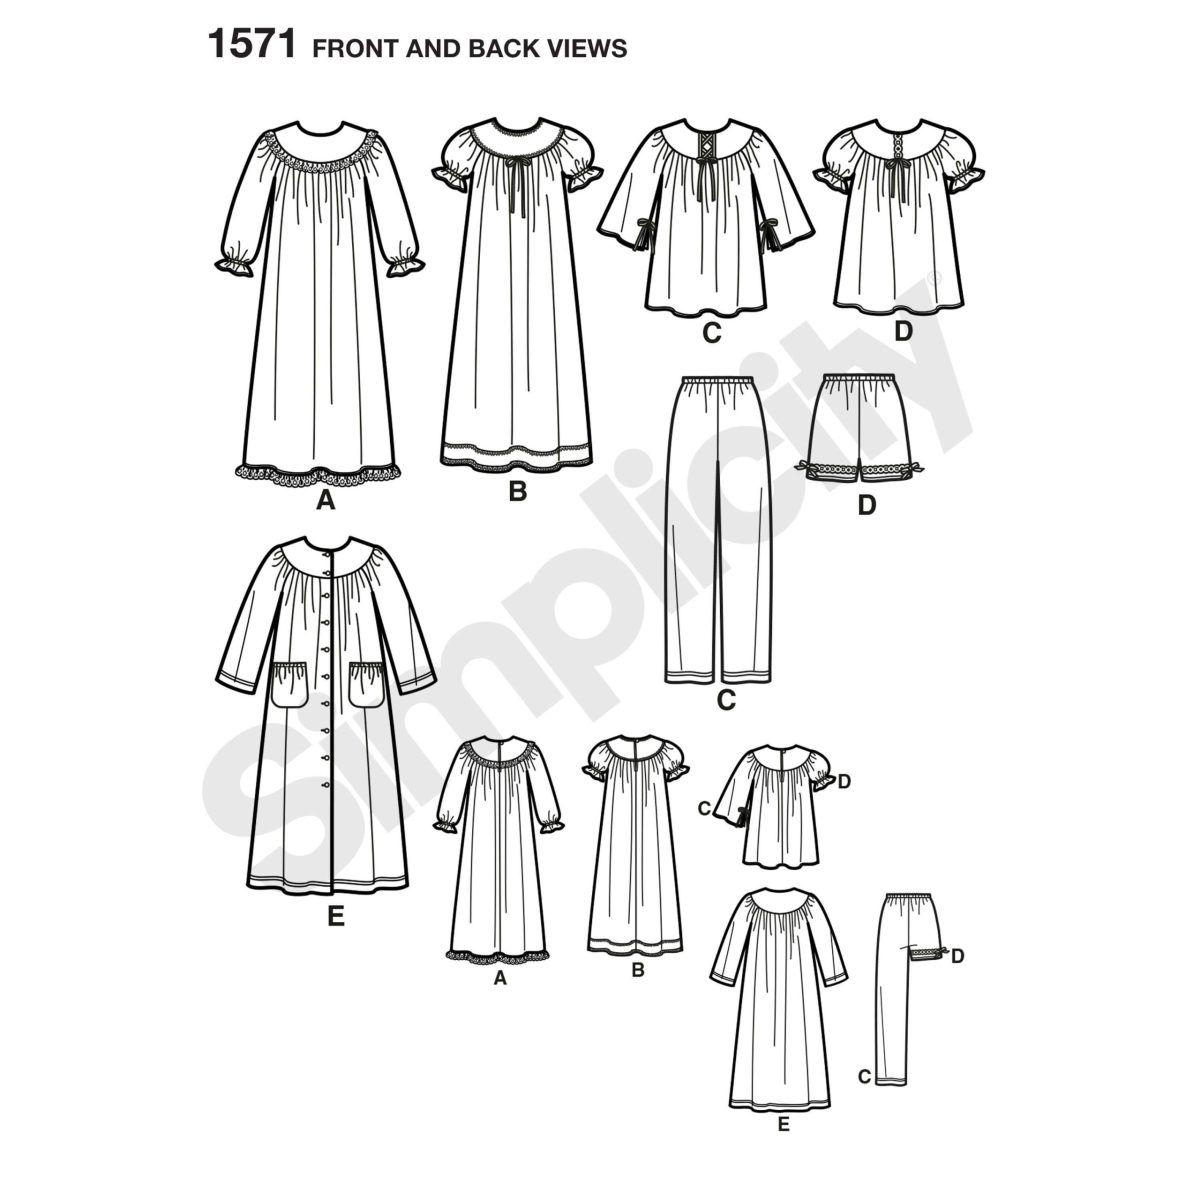 Simplicity Sewing Pattern 1571 Child's and Girl's Loungewear Separates